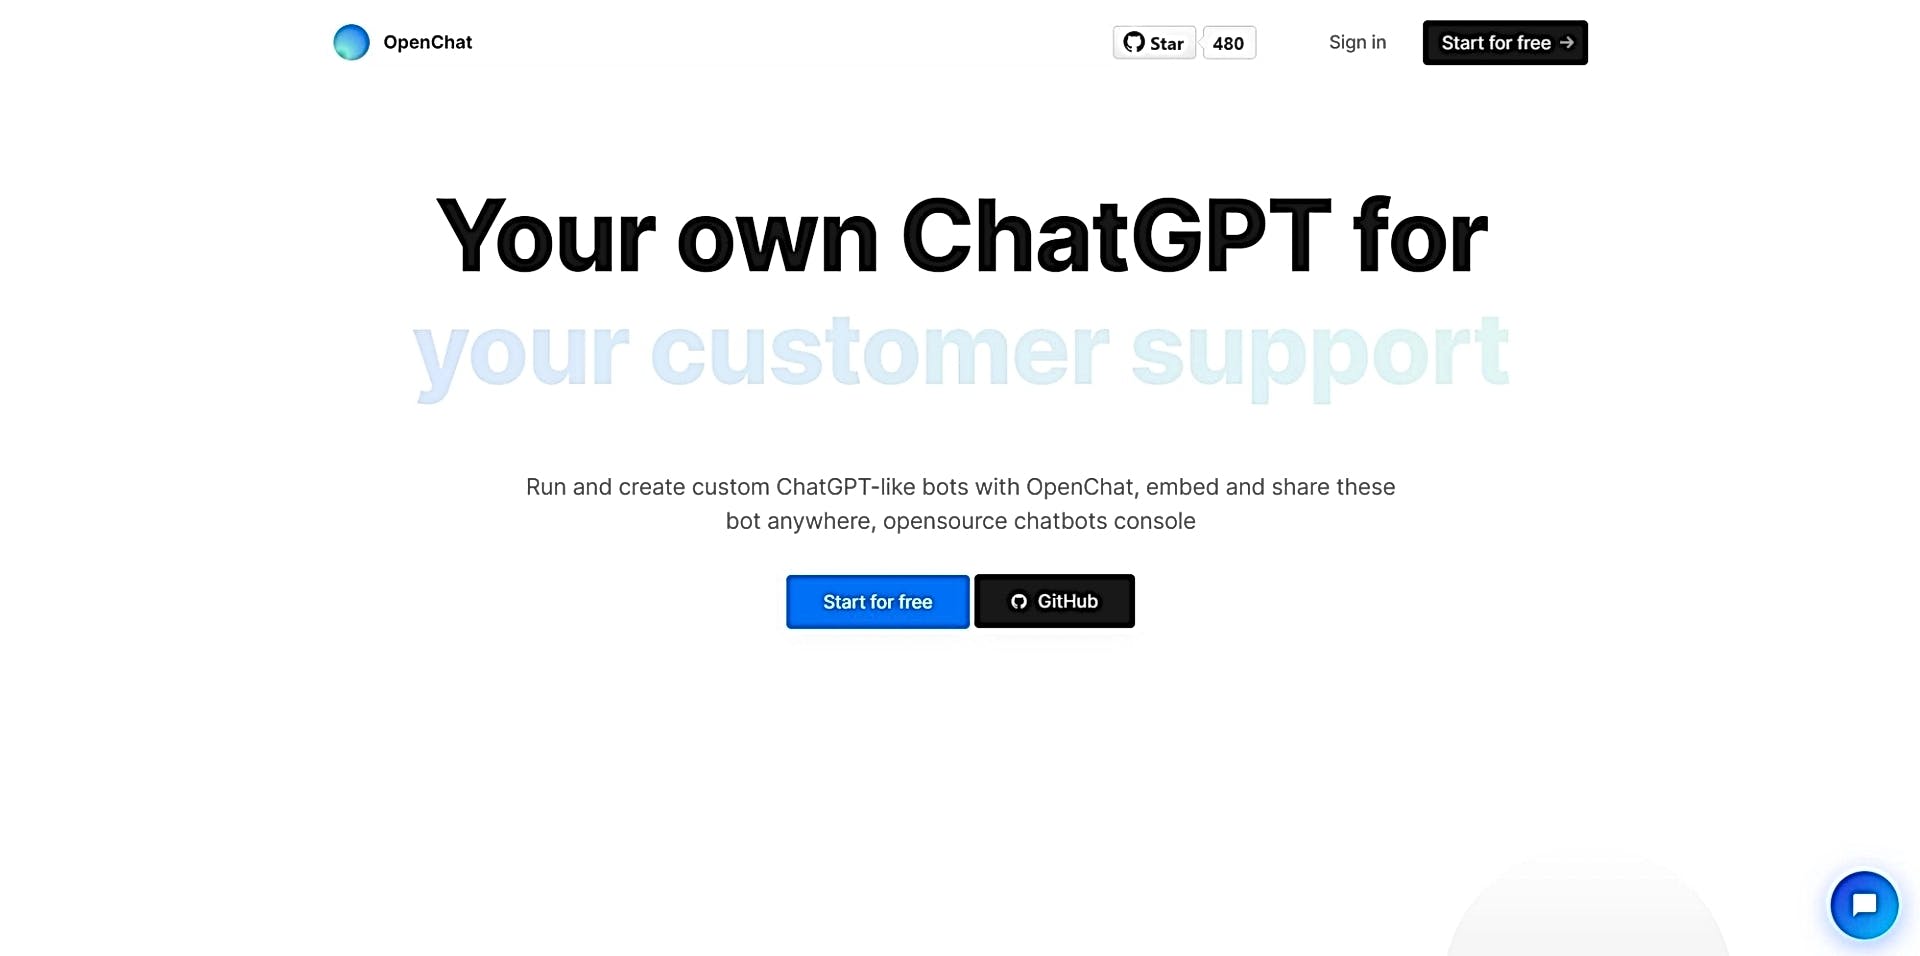 OpenChat featured